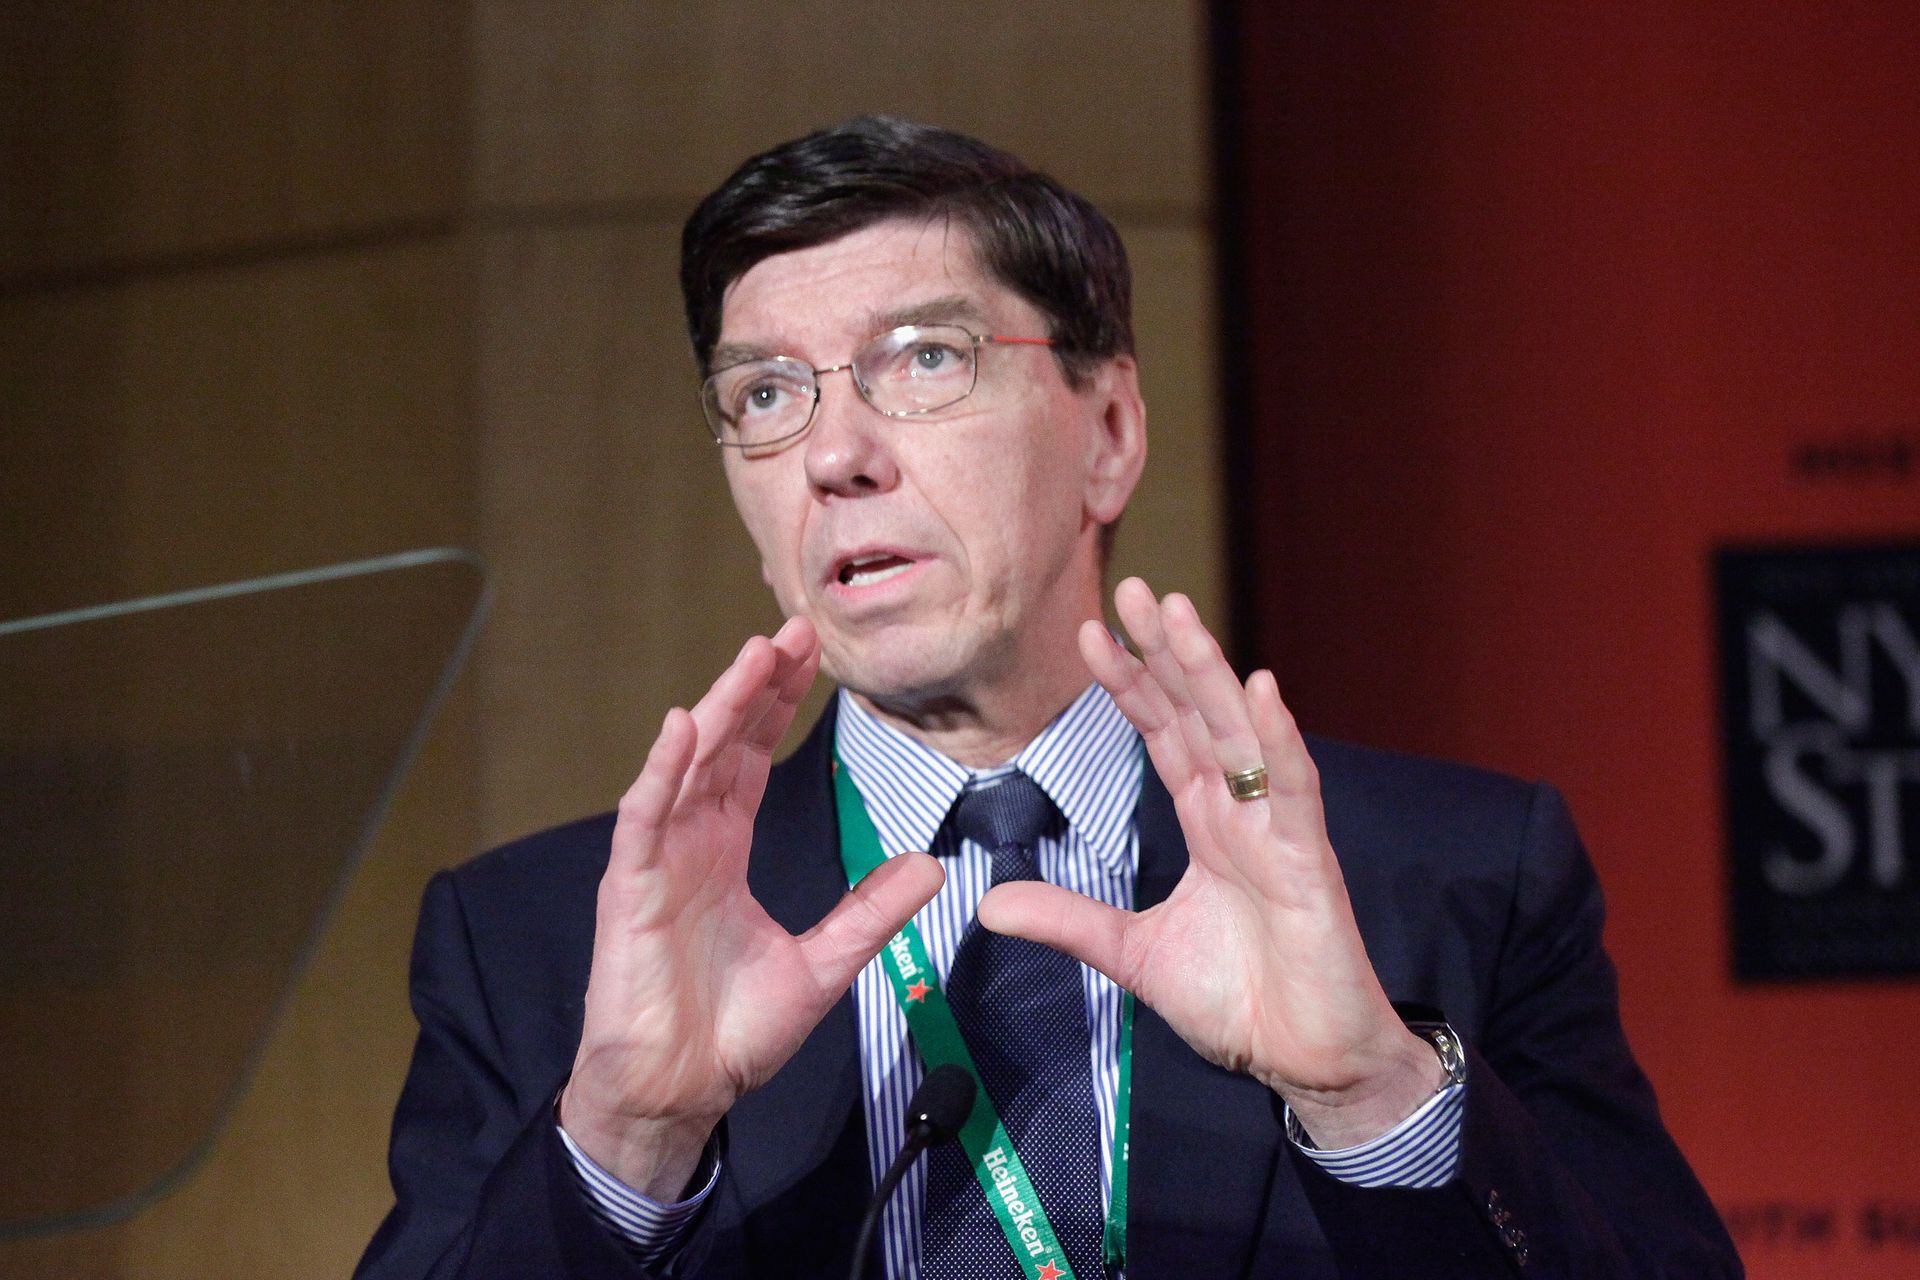 Clayton Christensen, father of "disruptive innovation," dies at 67 Axios